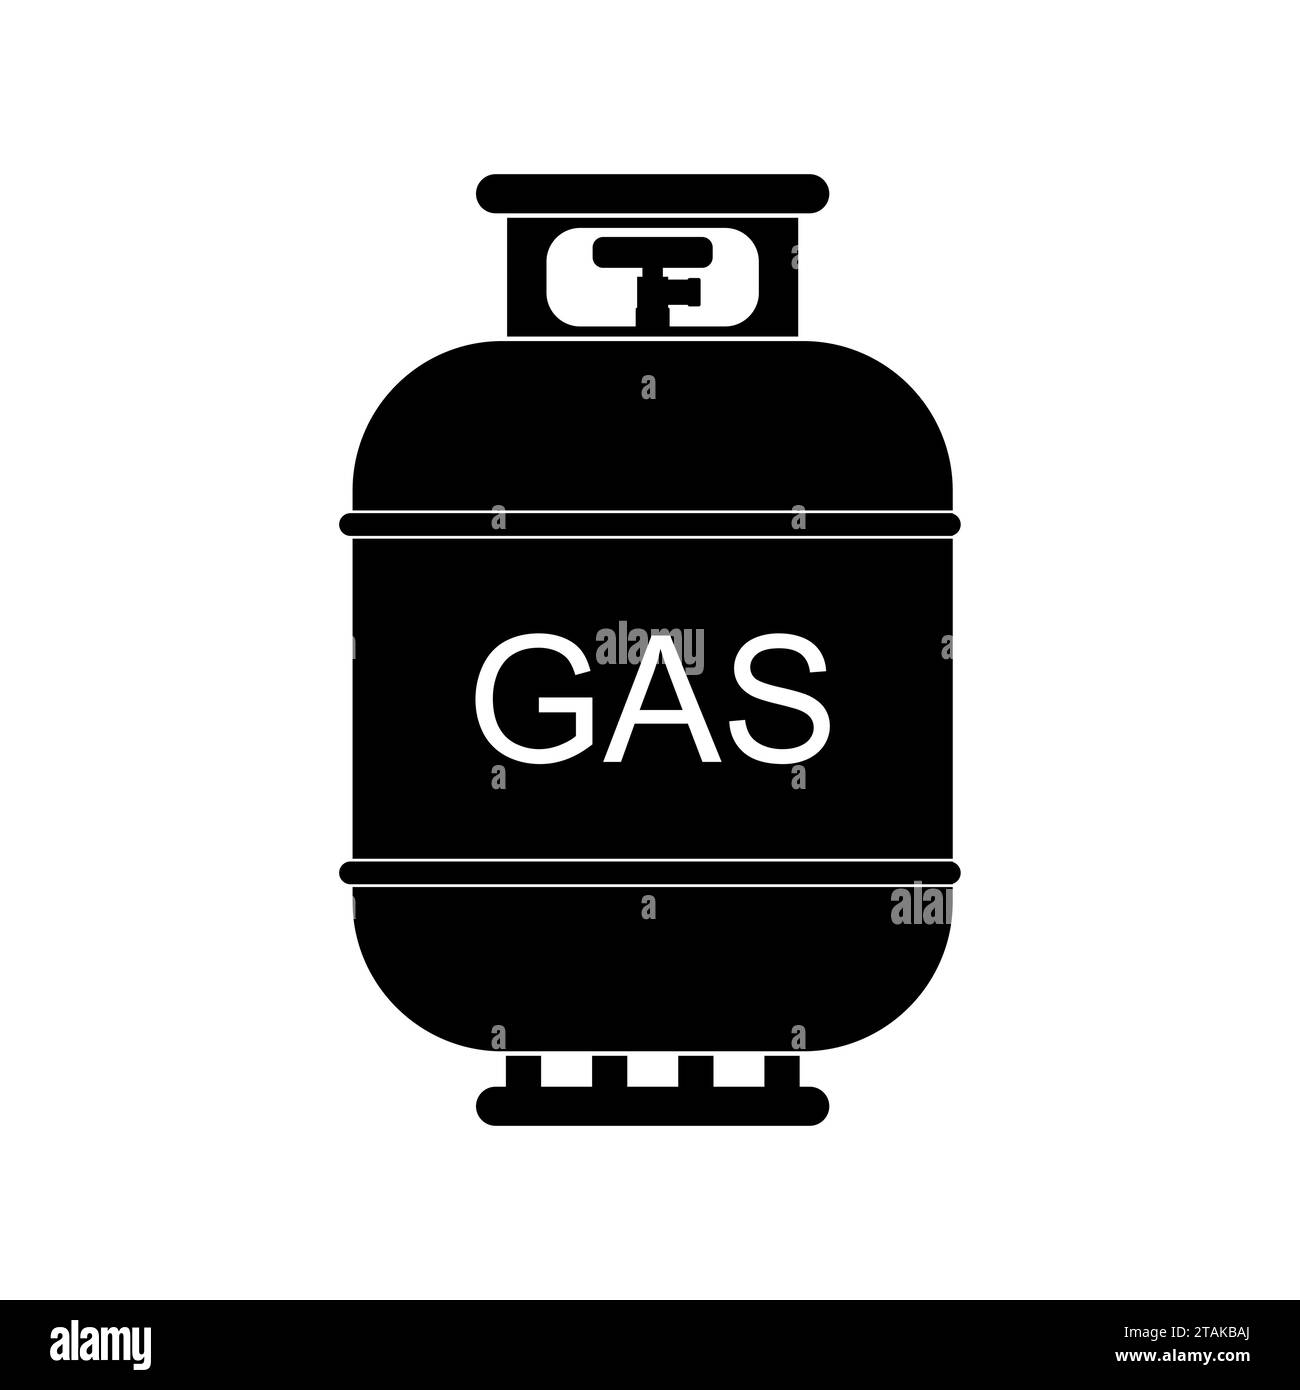 Gas tank icon in flat style. Propane cylinder pressure fuel gas lpd isolated on white background. Stock Vector